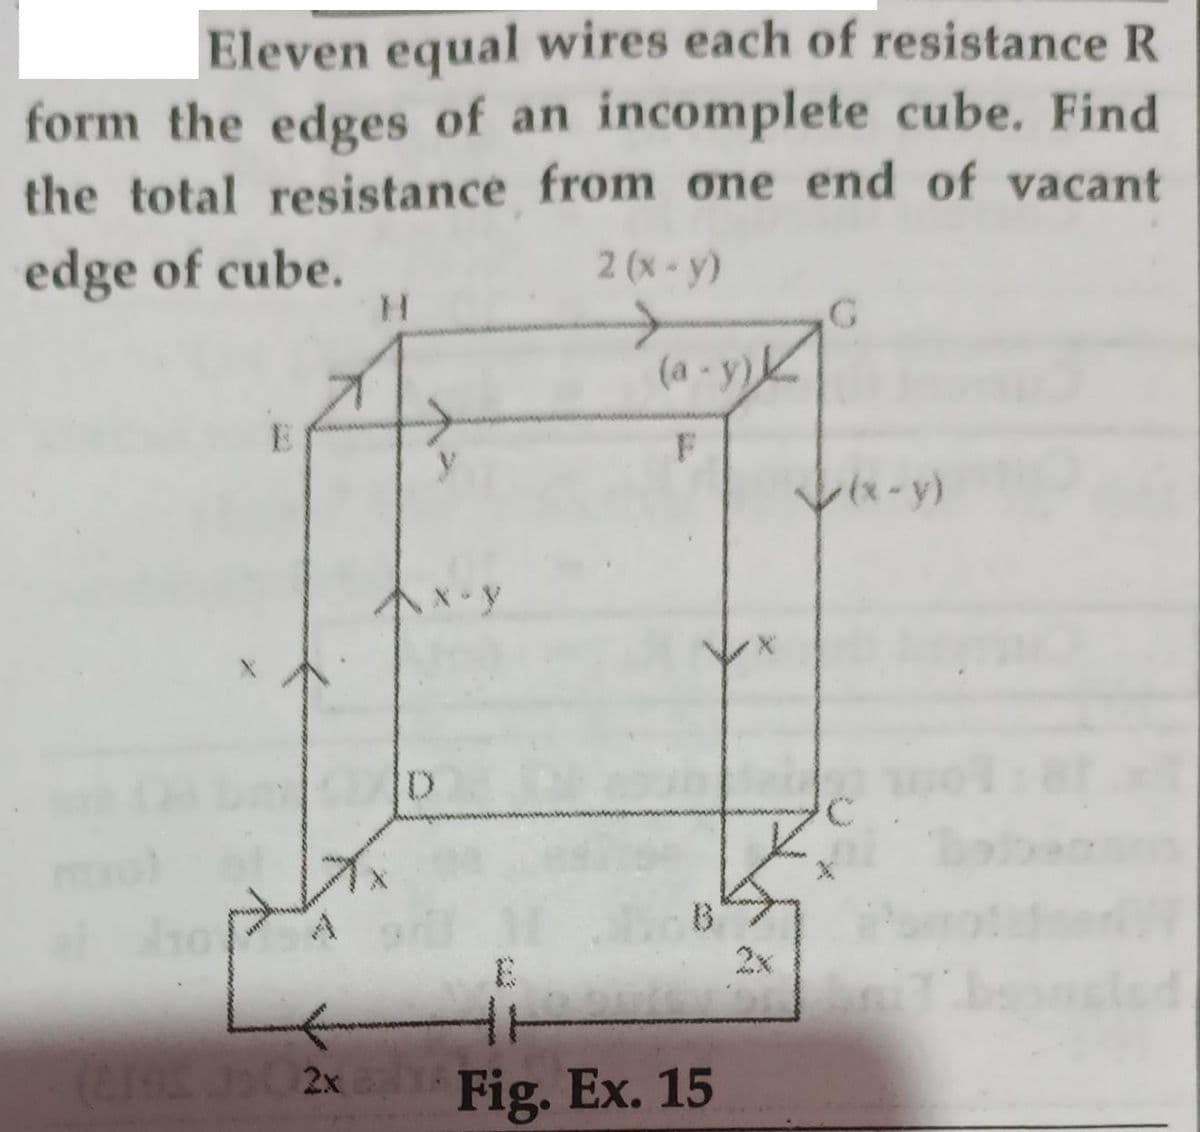 Eleven equal wires each of resistance R
form the edges of an incomplete cube. Find
the total resistance from one end of vacant
edge of cube.
2 (x-y)
H.
(a - y)k
E
(*-y)
"A
B
2x
2x
Fig. Ex. 15
